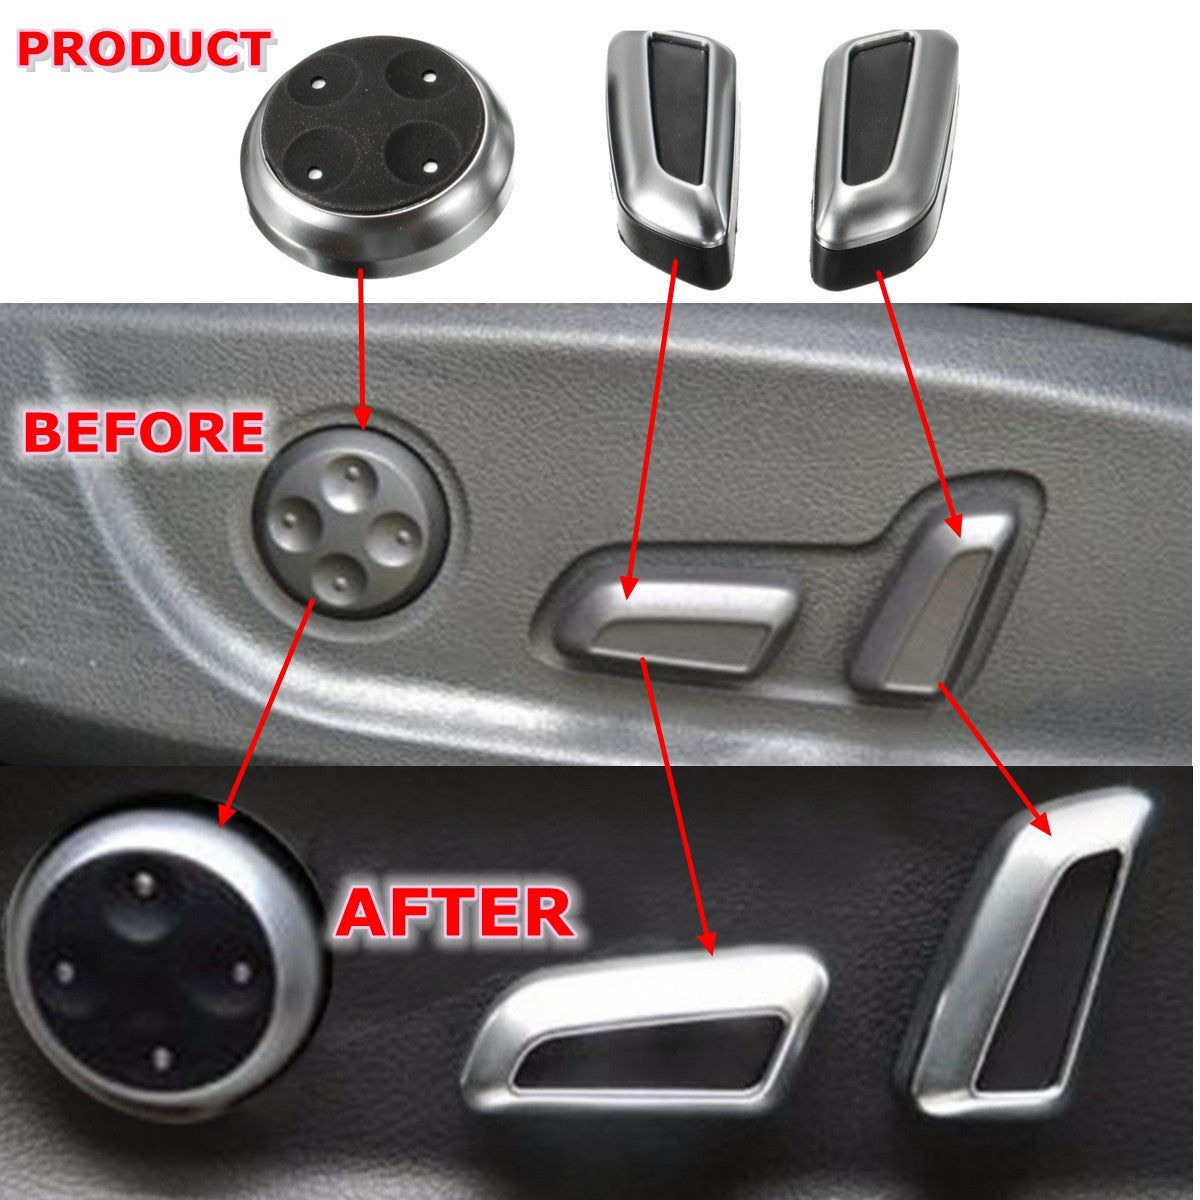 Dim Gray Chrome Seat Adjustment Switch Cover Trims for Audi A3 A4 A5 A6 Q3 Q5 for VW Tiguan